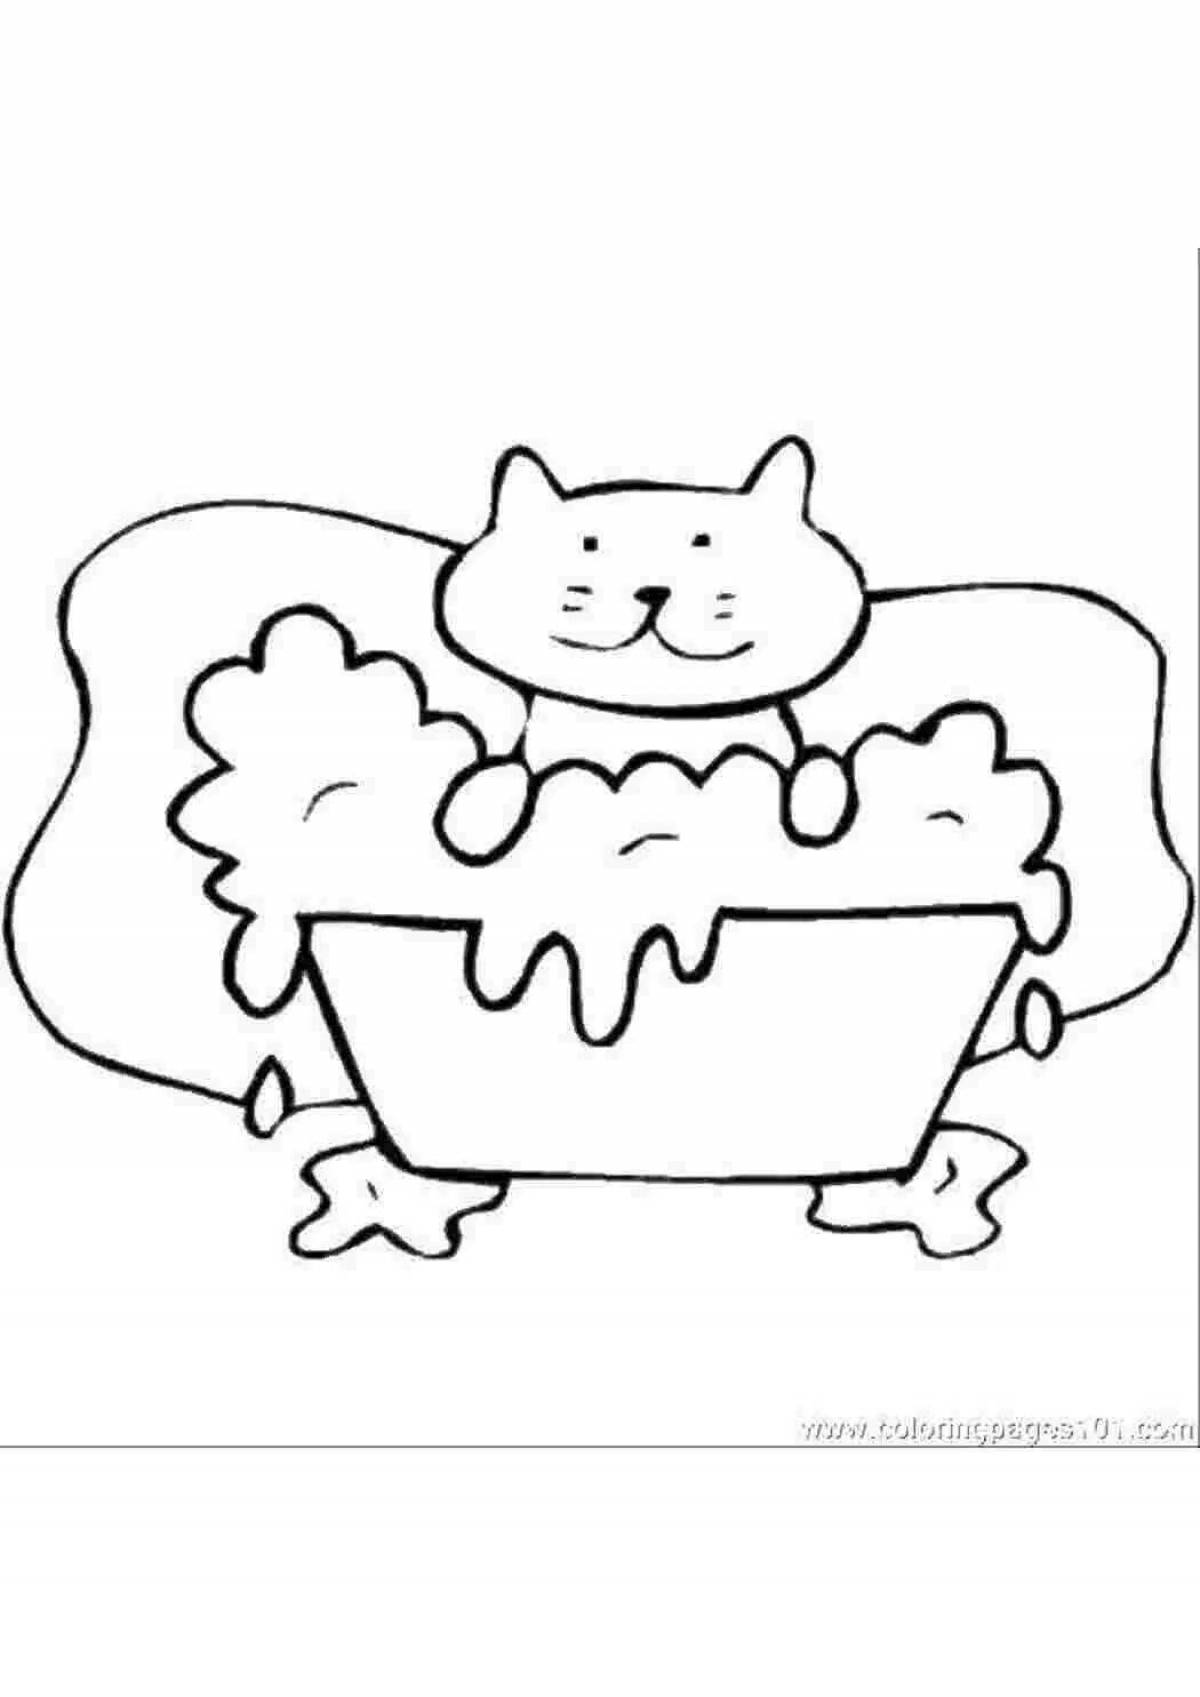 Coloring page mischievous kitten in a cup